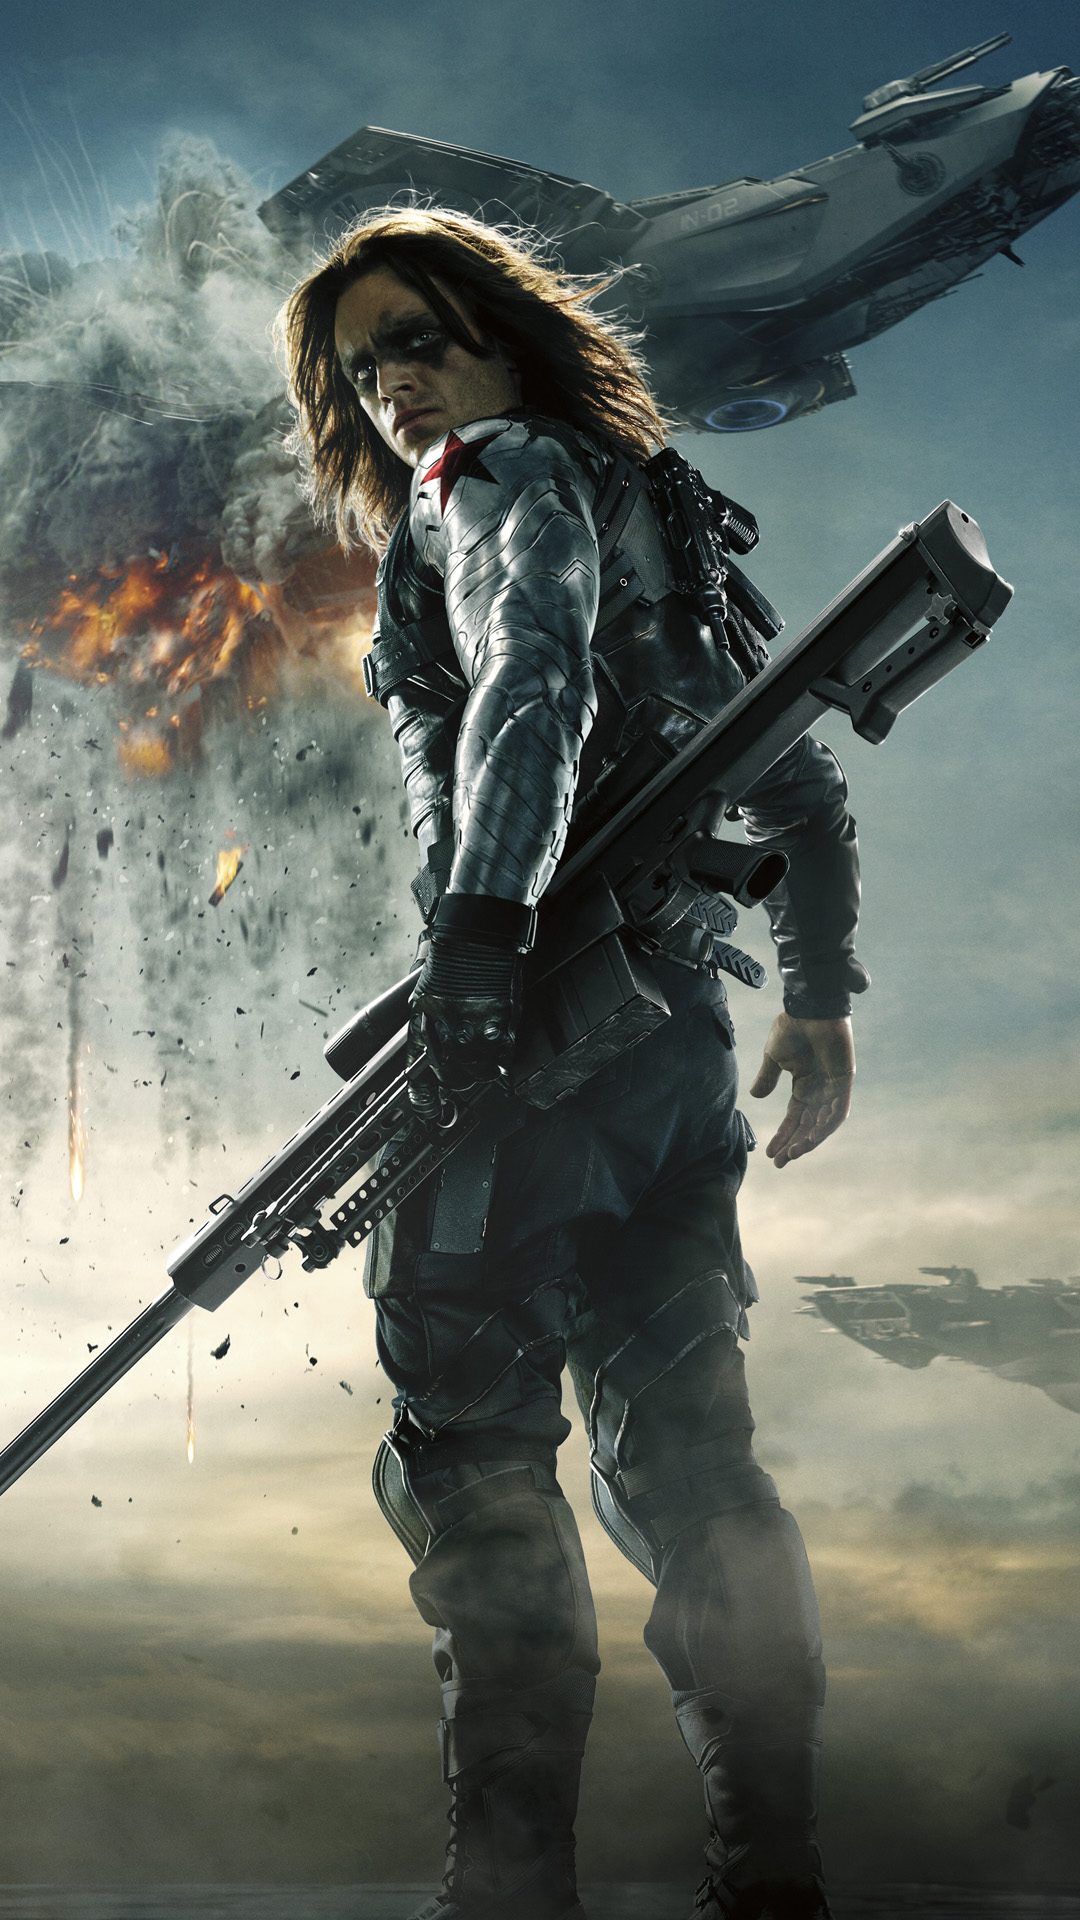 winter soldier wallpaper,movie,action adventure game,soldier,action film,shooter game